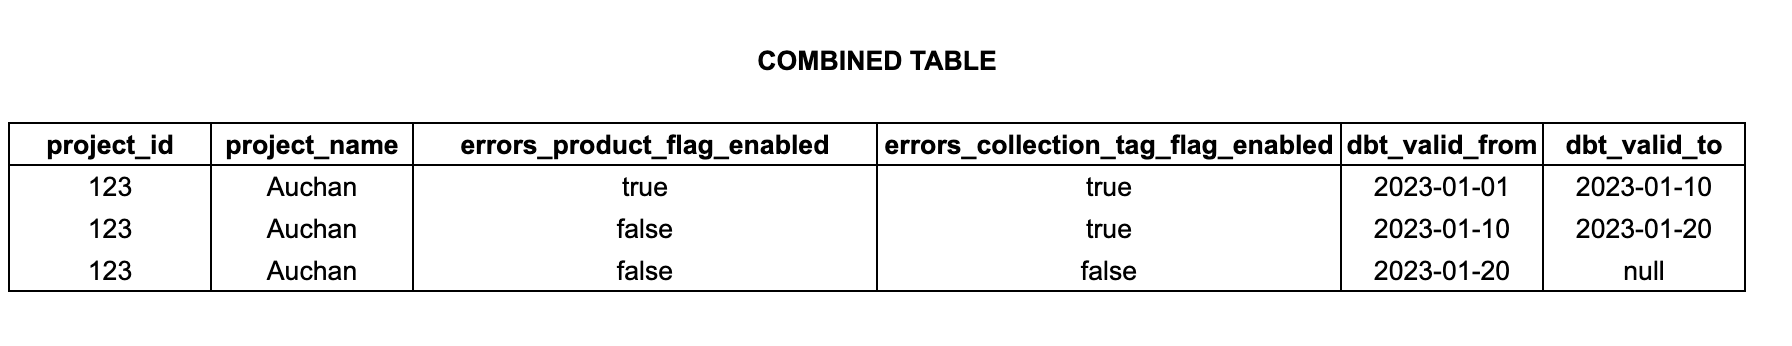 Combined table output